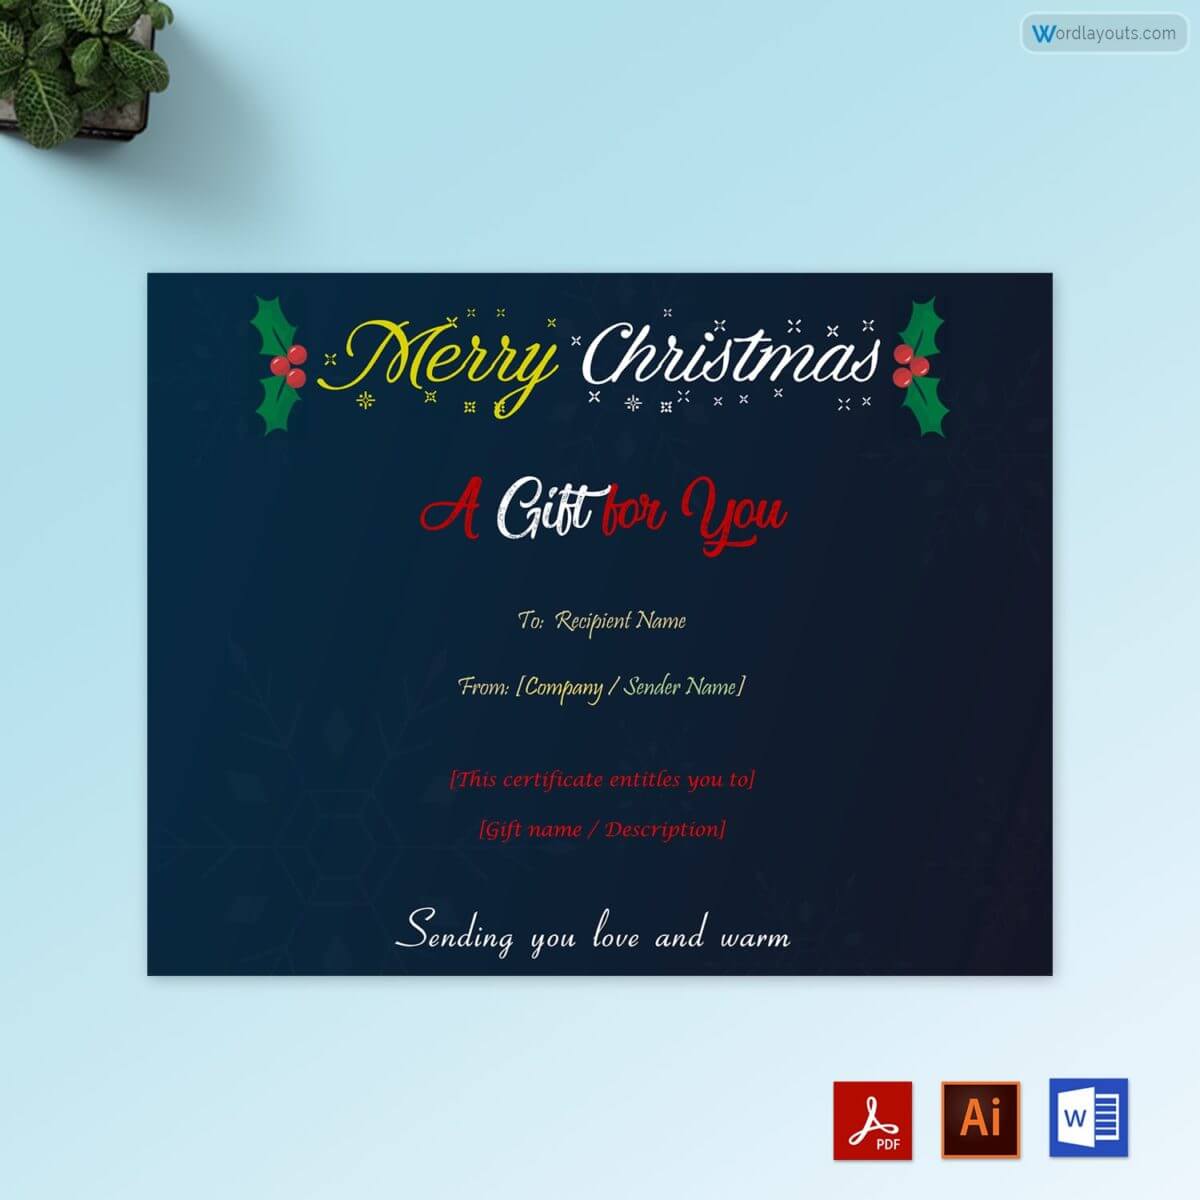 Free Downloadable Christmas Gift Certificate Template 11 for Word, Adobe and AI Format